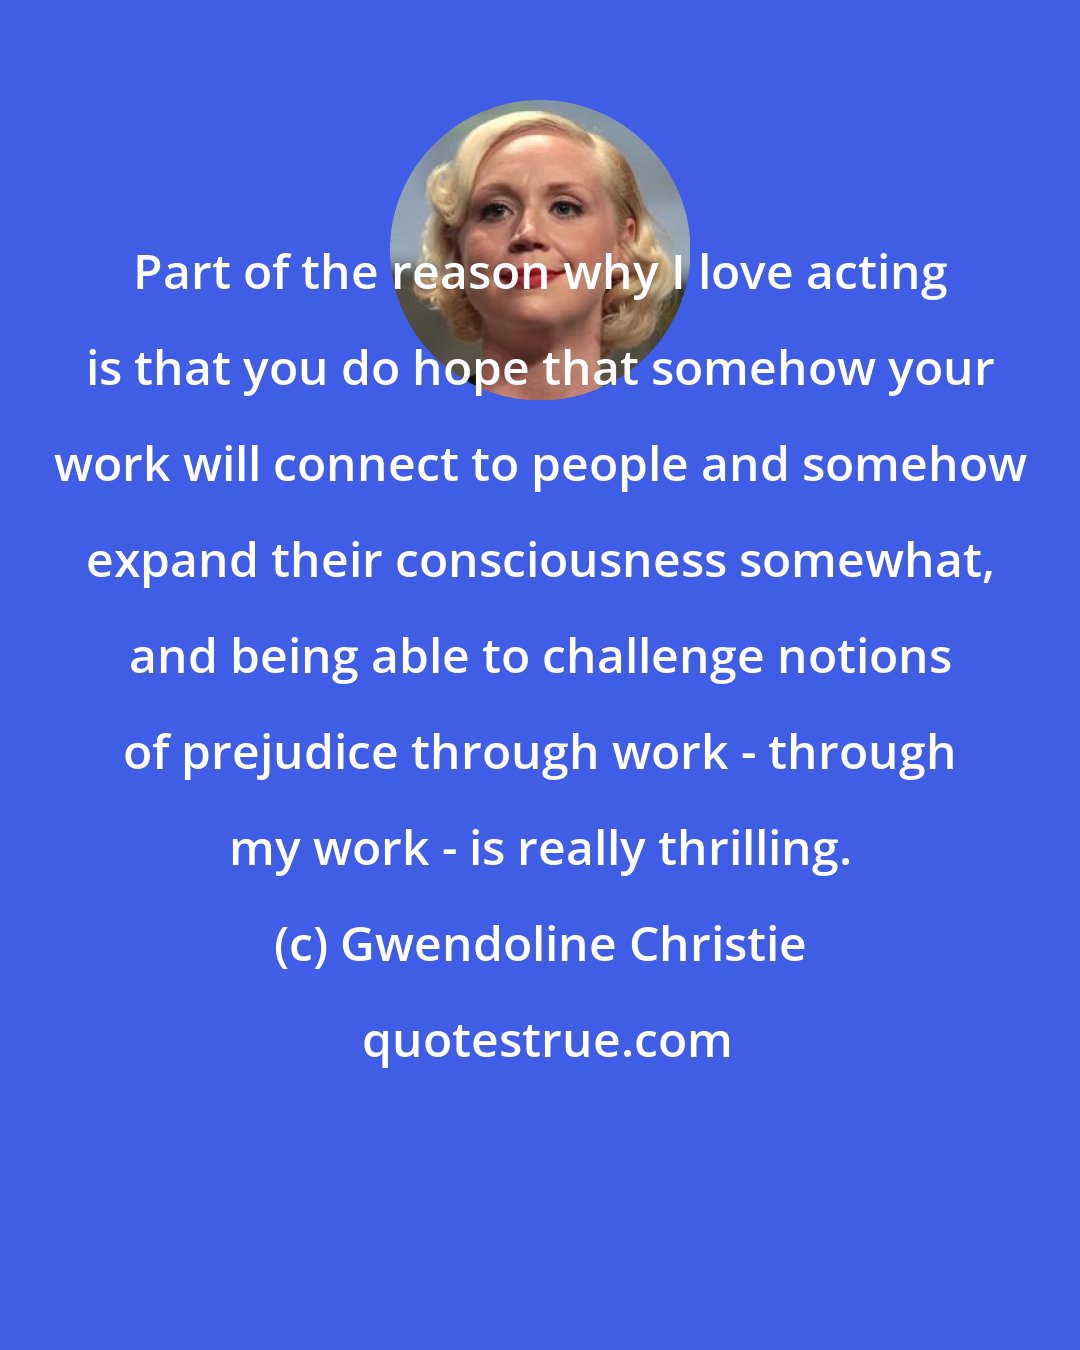 Gwendoline Christie: Part of the reason why I love acting is that you do hope that somehow your work will connect to people and somehow expand their consciousness somewhat, and being able to challenge notions of prejudice through work - through my work - is really thrilling.